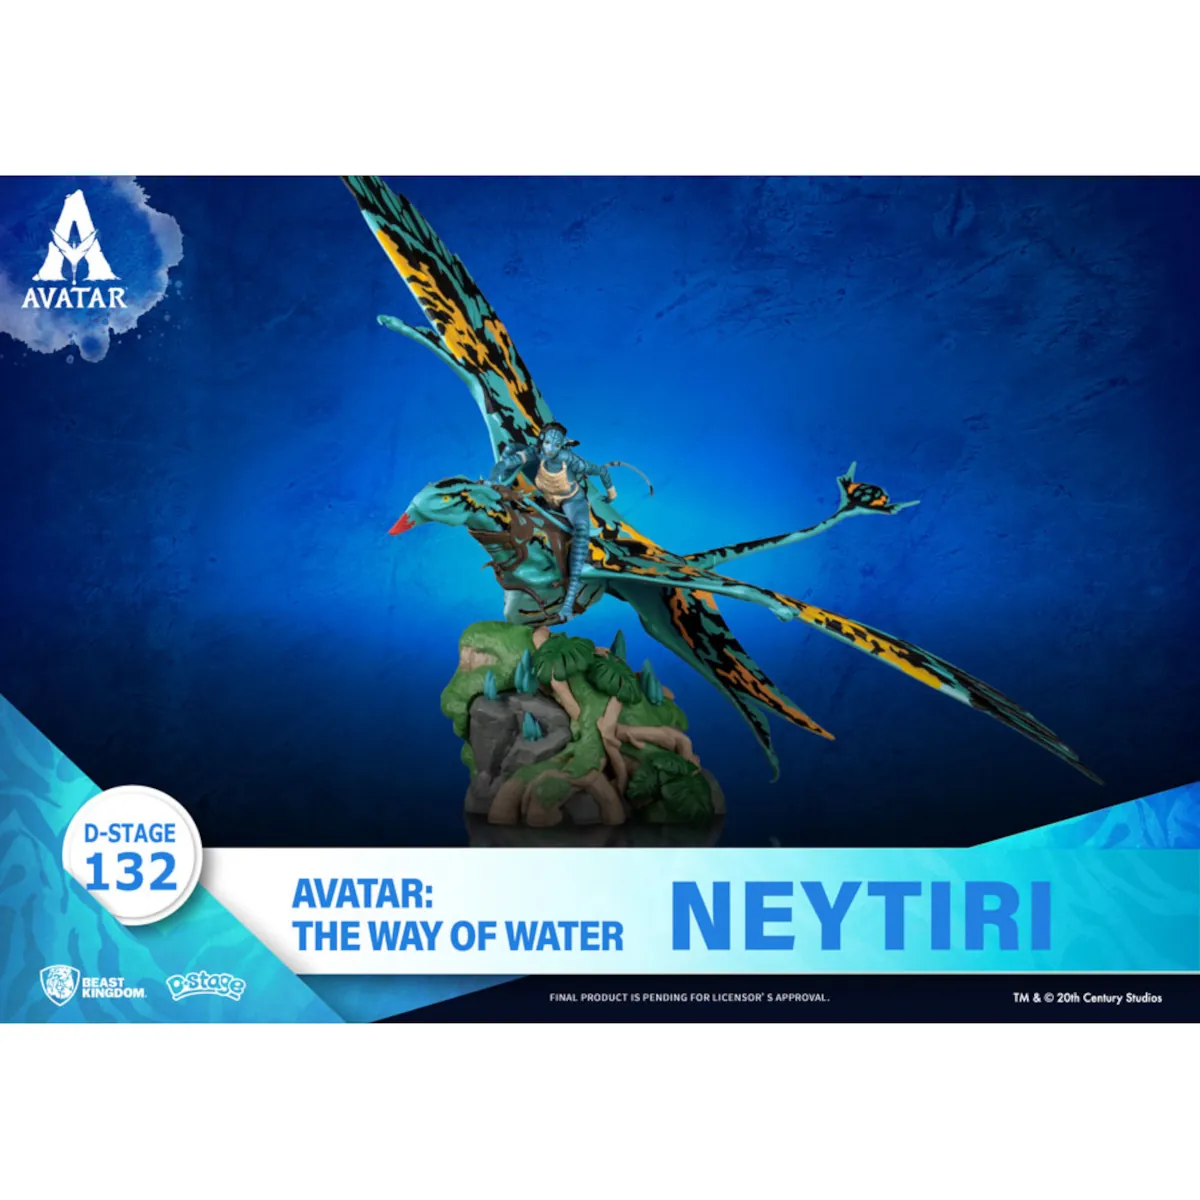 DS-132 Avatar The Way of Water D-Stage 12cm Neytiri PVC Diorama